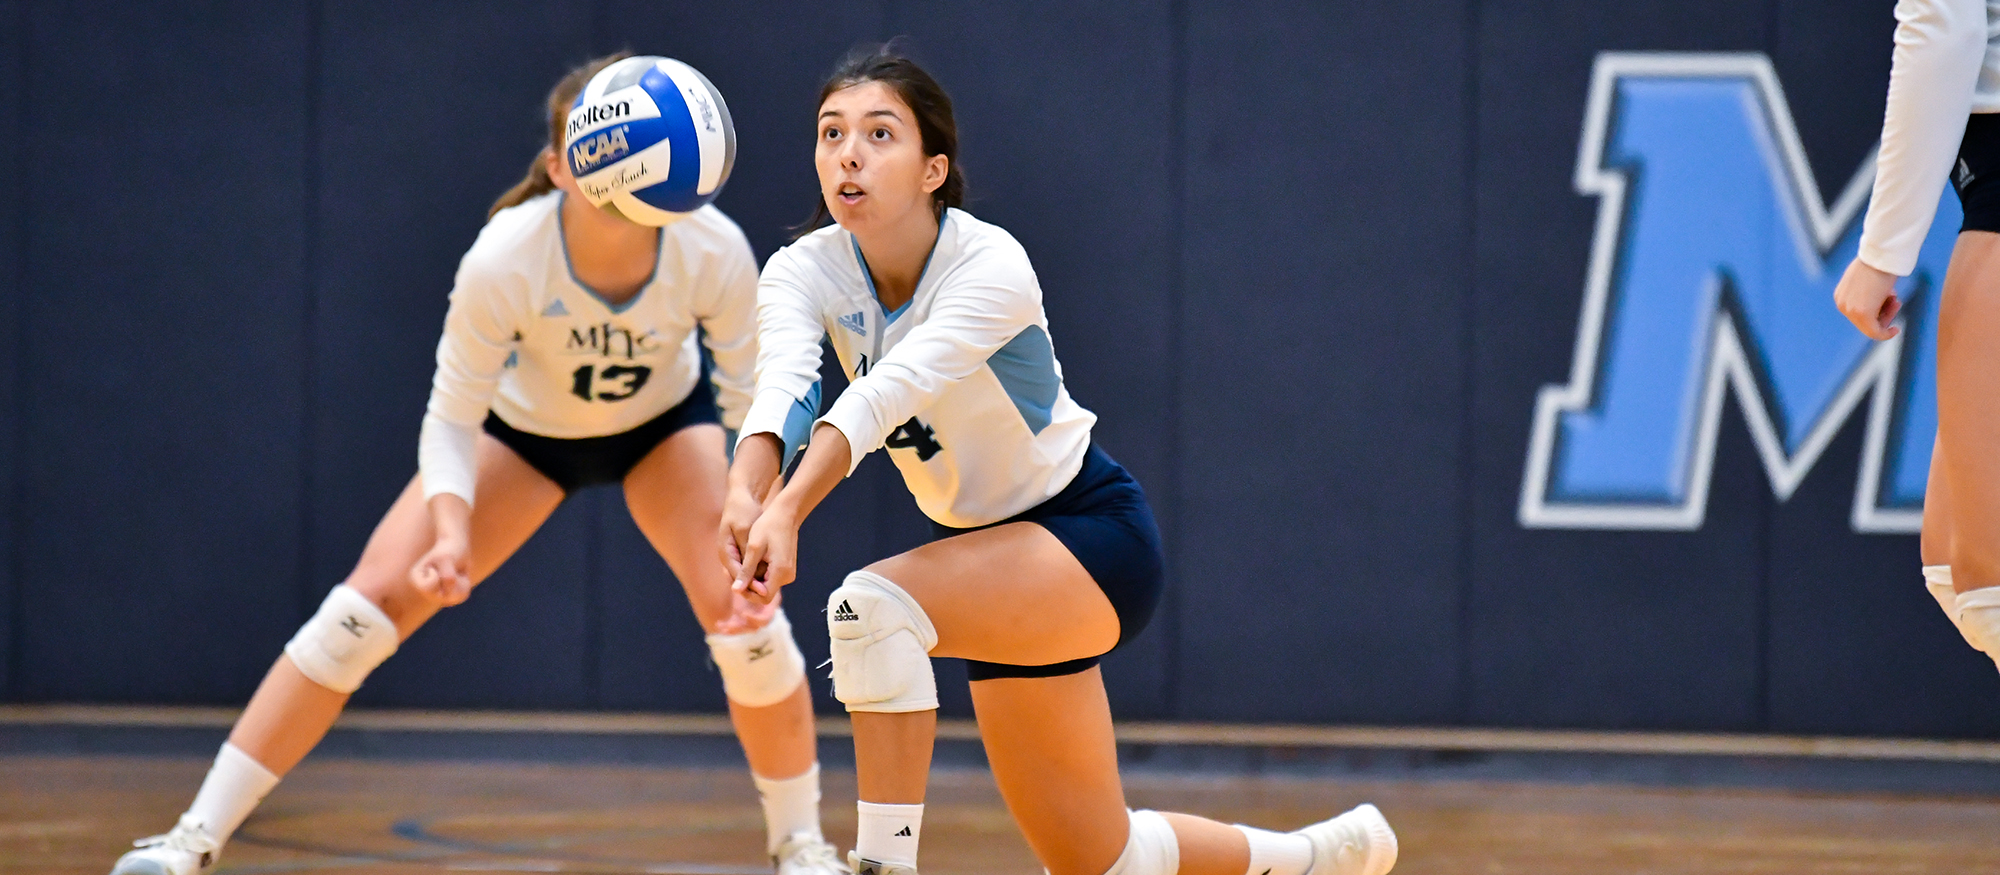 Mar Simon had six kills and eight digs in a 3-0 loss at Clark University on Sept. 20, 2022. (RJB Sports file photo)